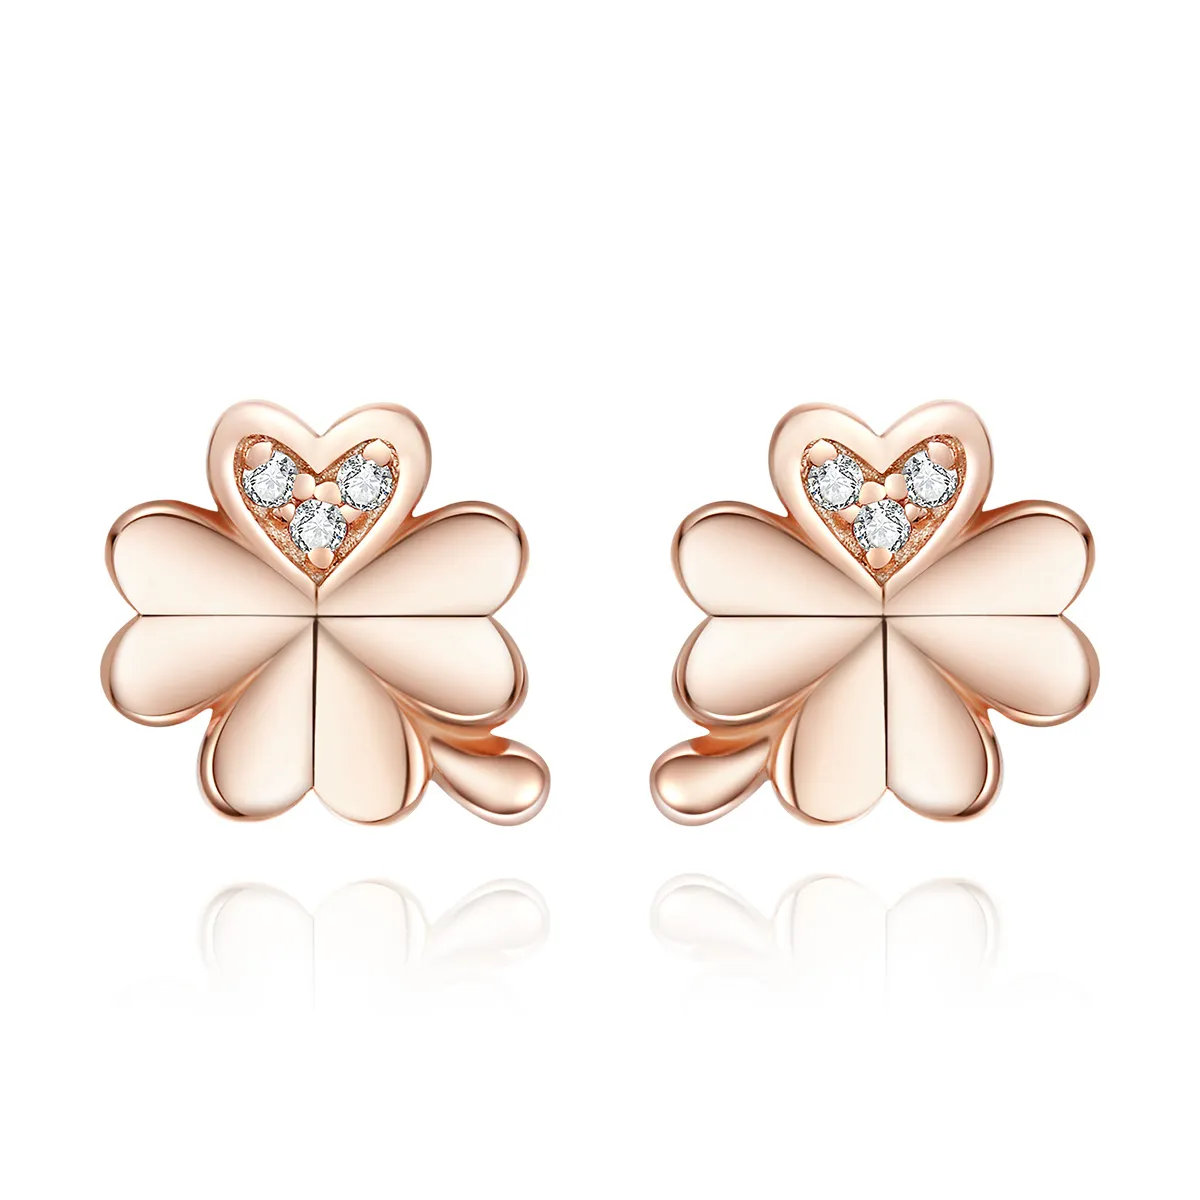 Pandora Style Rose Gold Clover Stud Earrings - BSE233